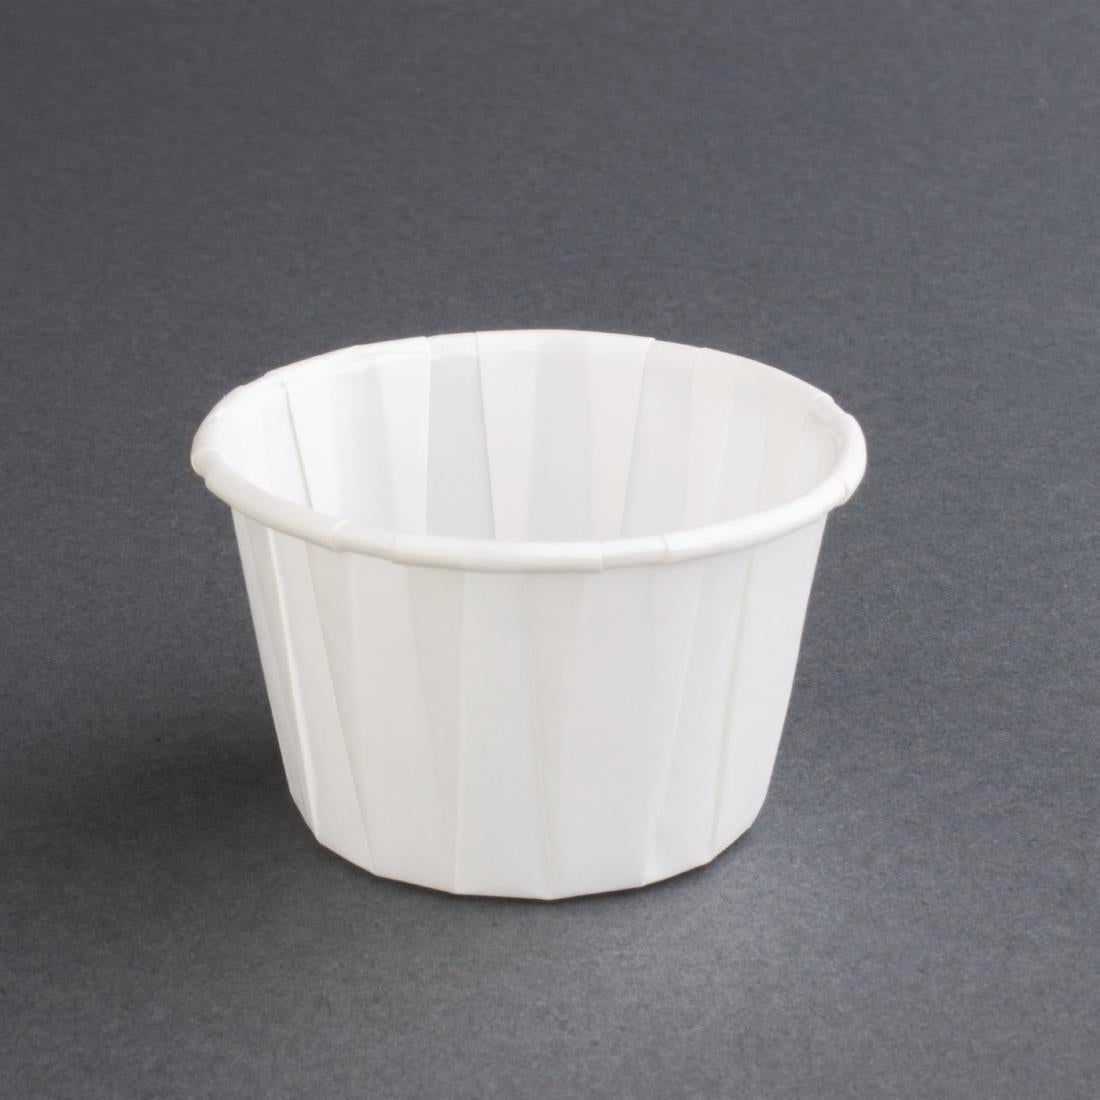 CX081 Recyclable Paper Sauce Pots Medium 2oz (Pack of 250)